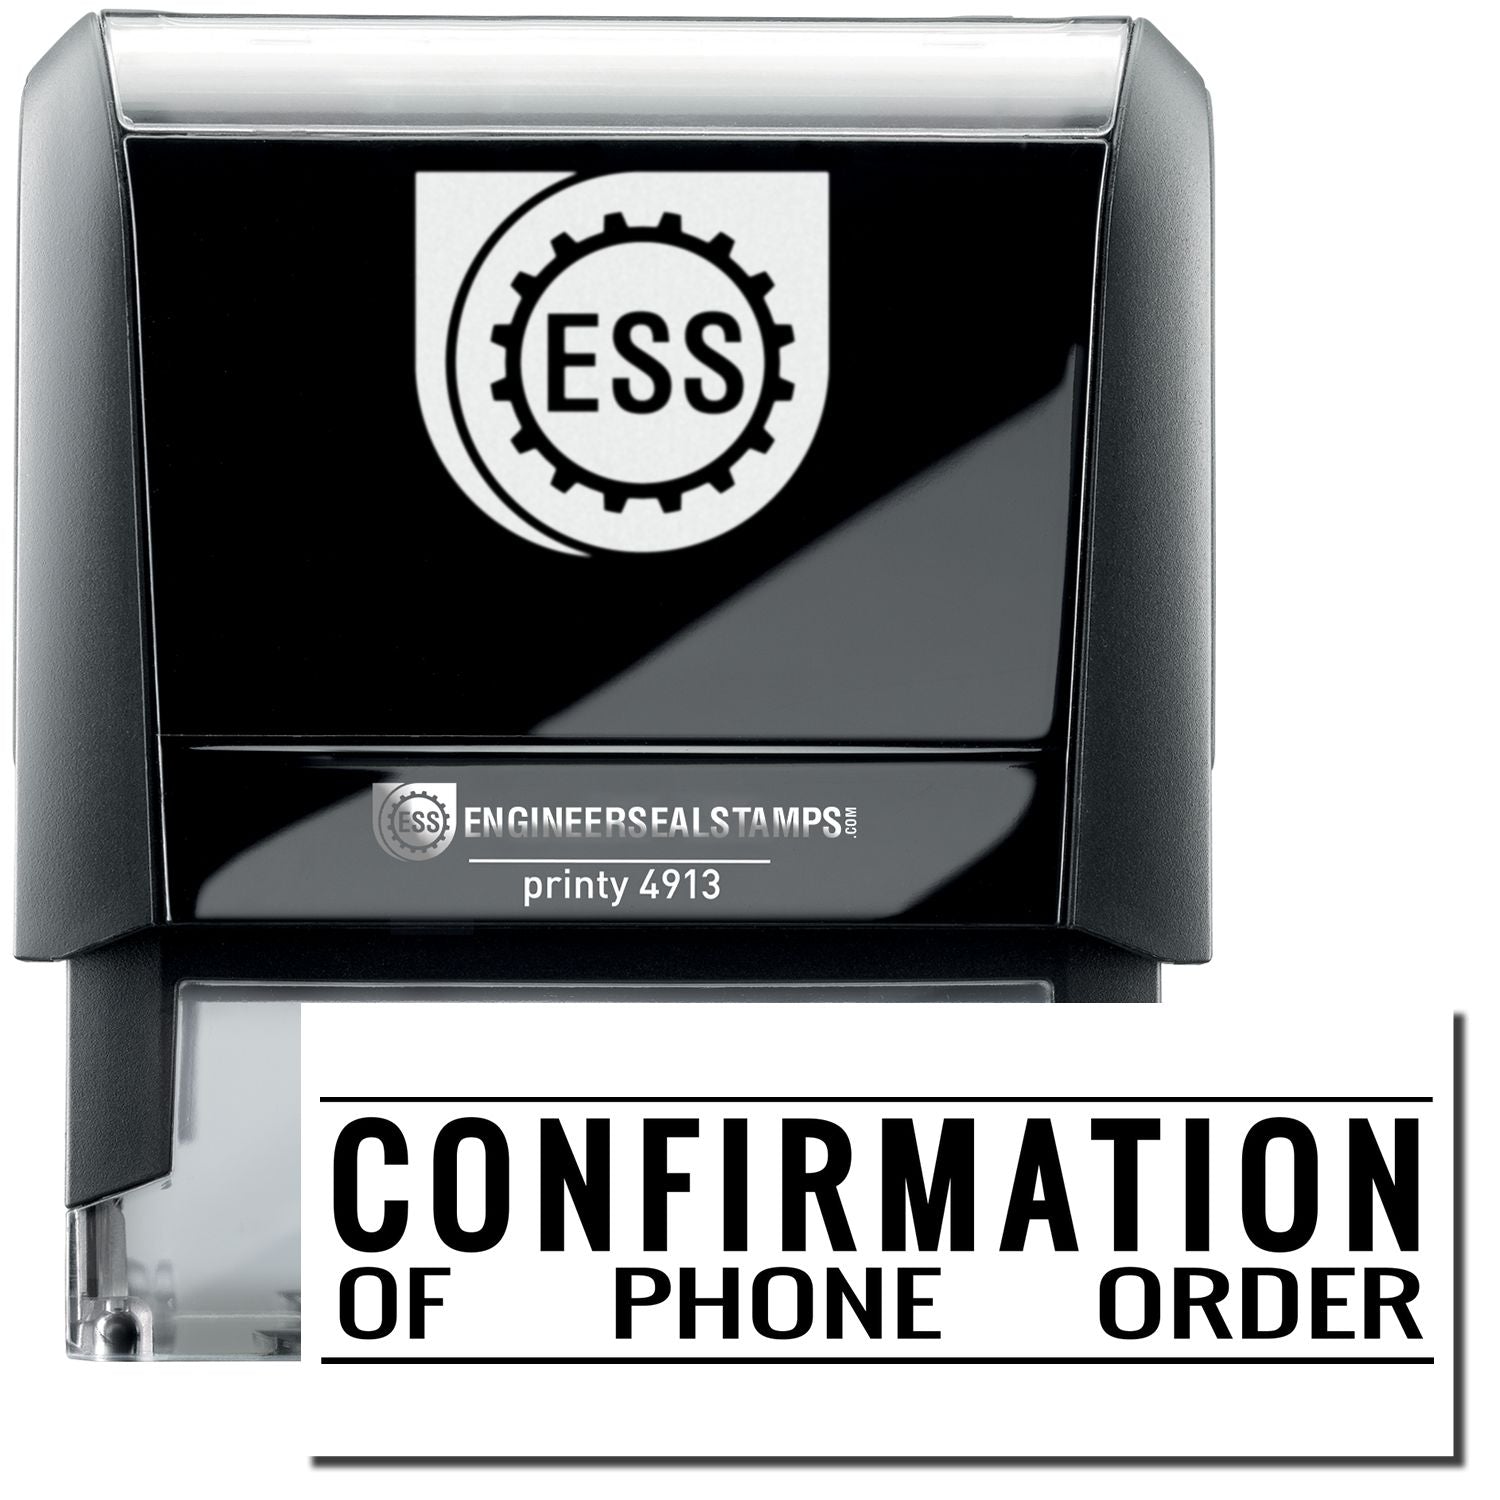 A self-inking stamp with a stamped image showing how the text "CONFIRMATION OF PHONE ORDER" in a large font with two horizontal lines above and under the text is displayed after stamping.